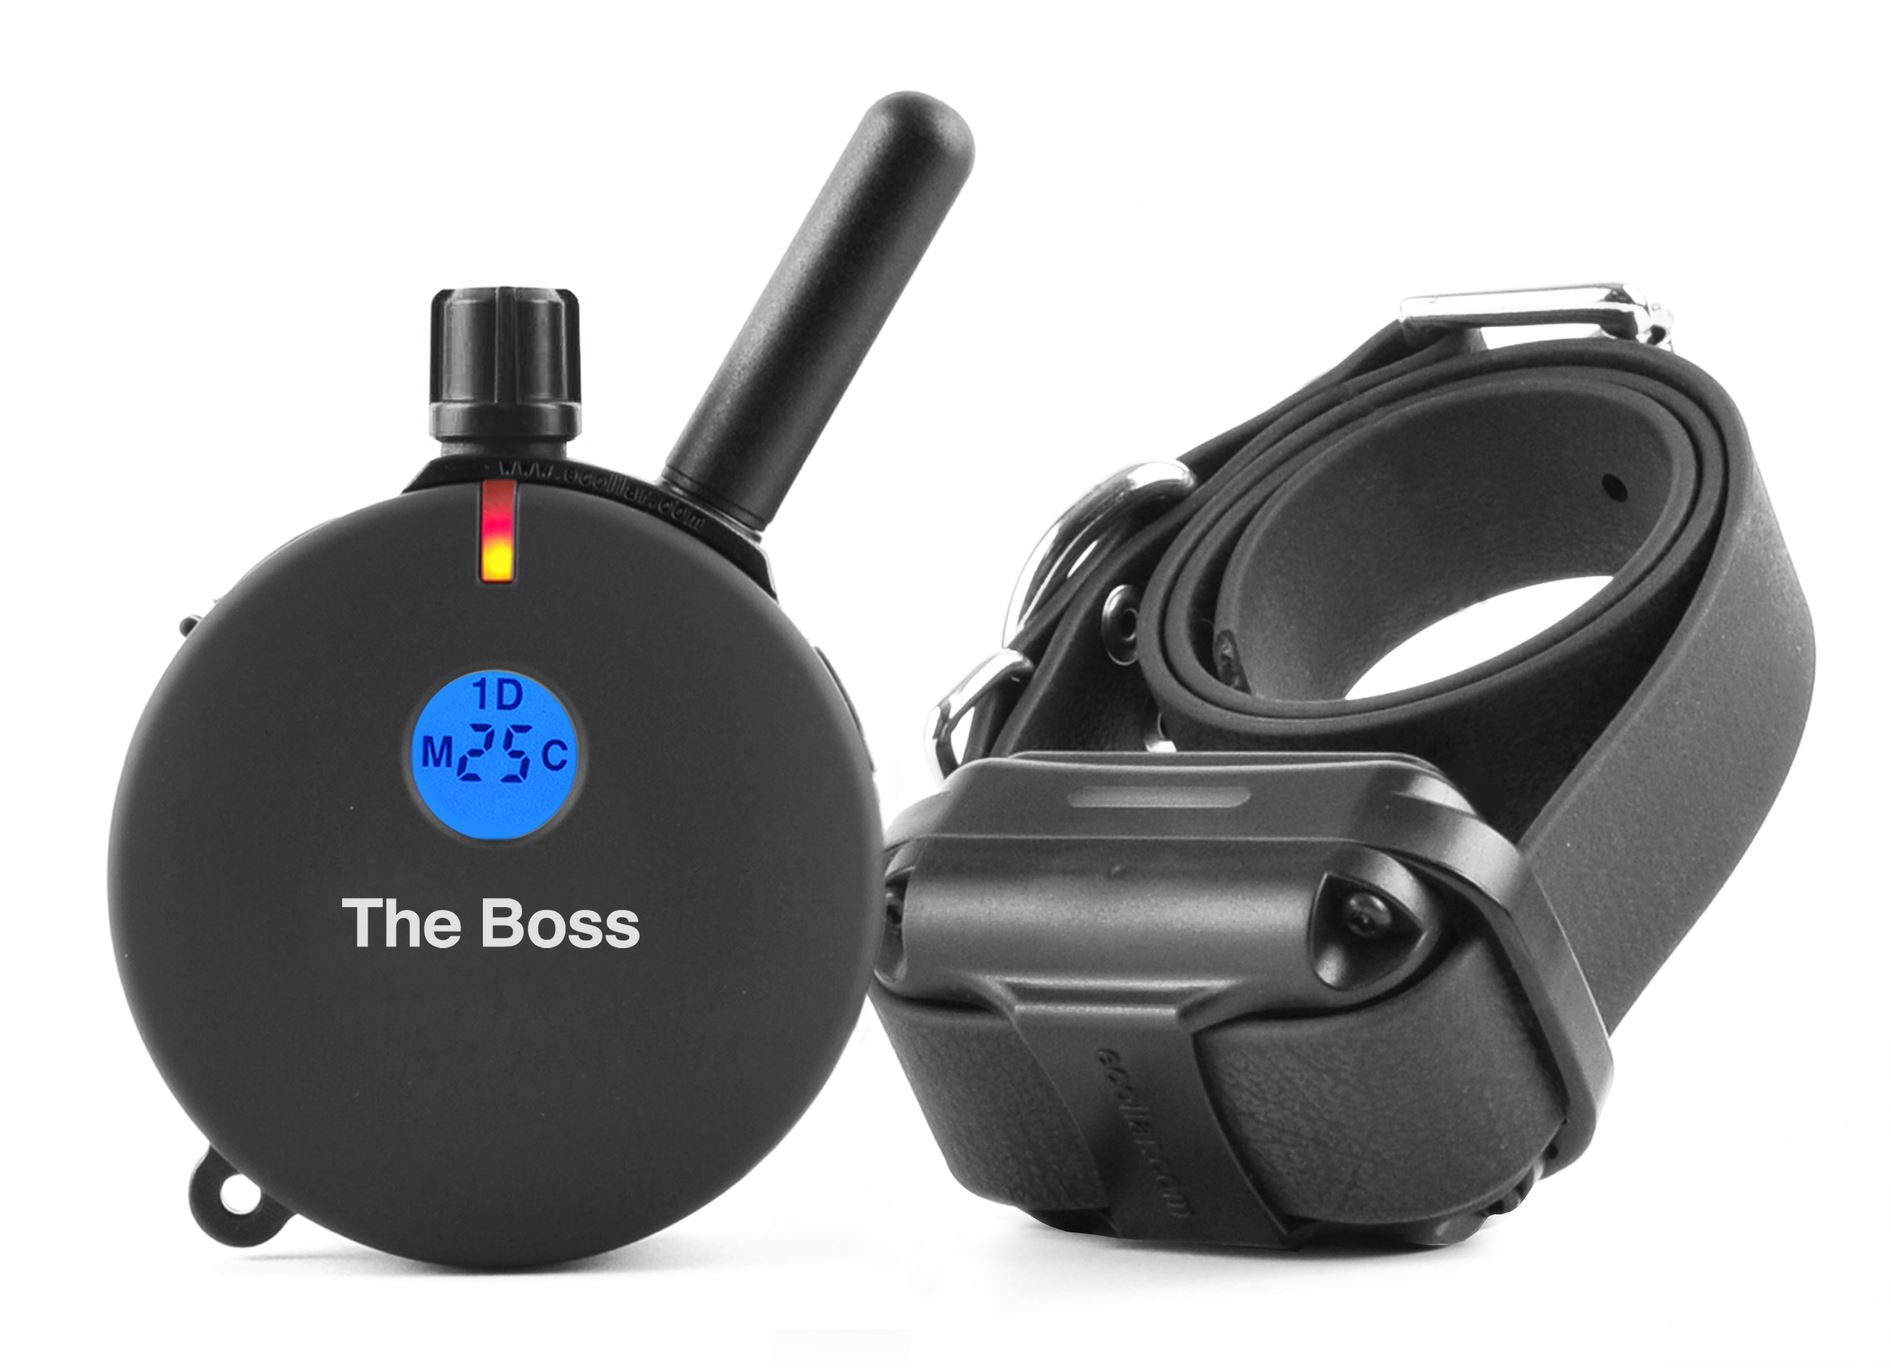 The Complete Guide to Using the Boss Educator ET-800 by E-Collar Technologies